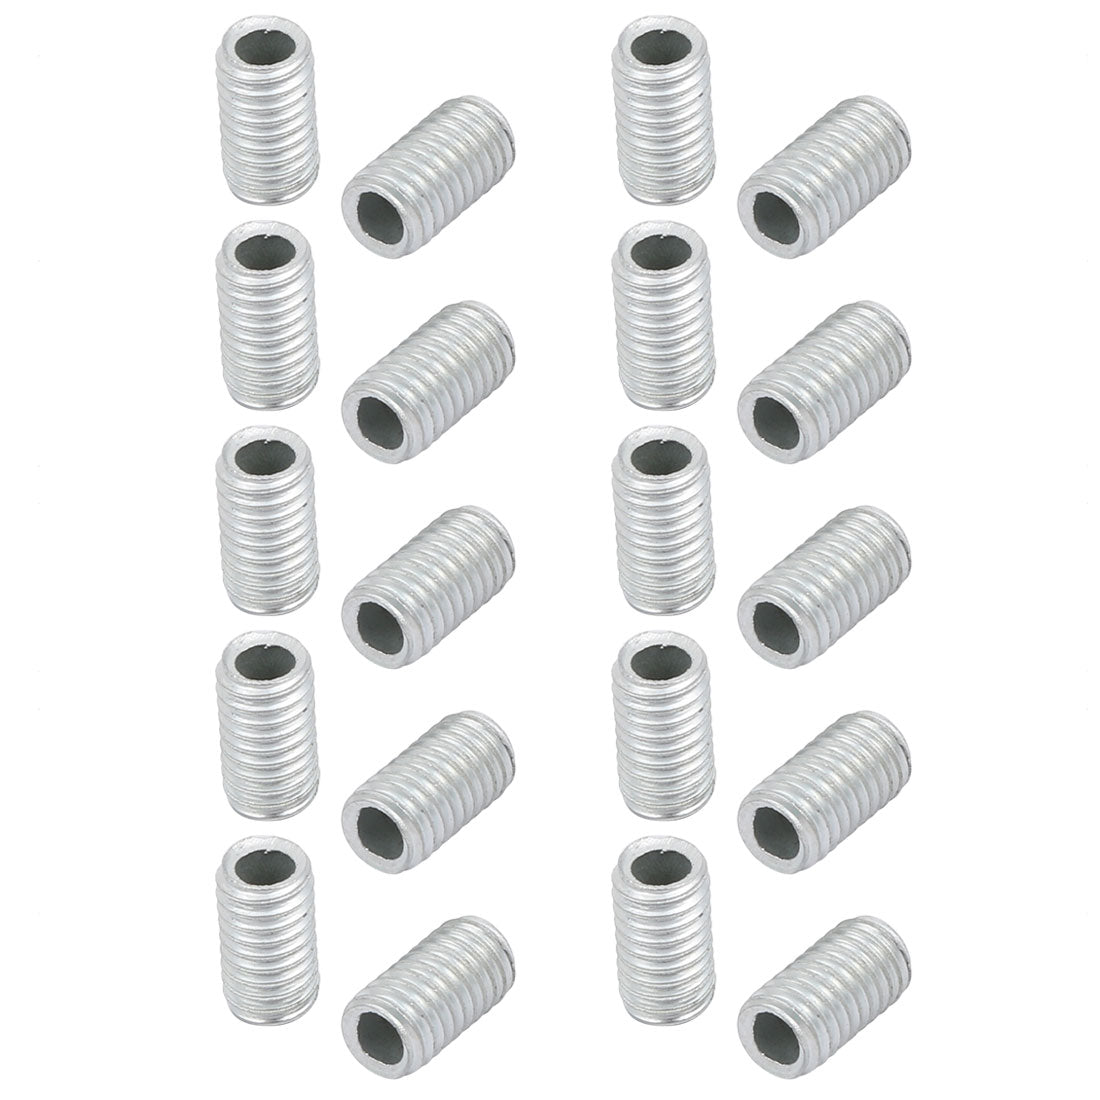 uxcell Uxcell 20pcs Metric M6 Thread Zinc Plated Hollow Pipe Nipple Lamp Repair Part 10mm Long